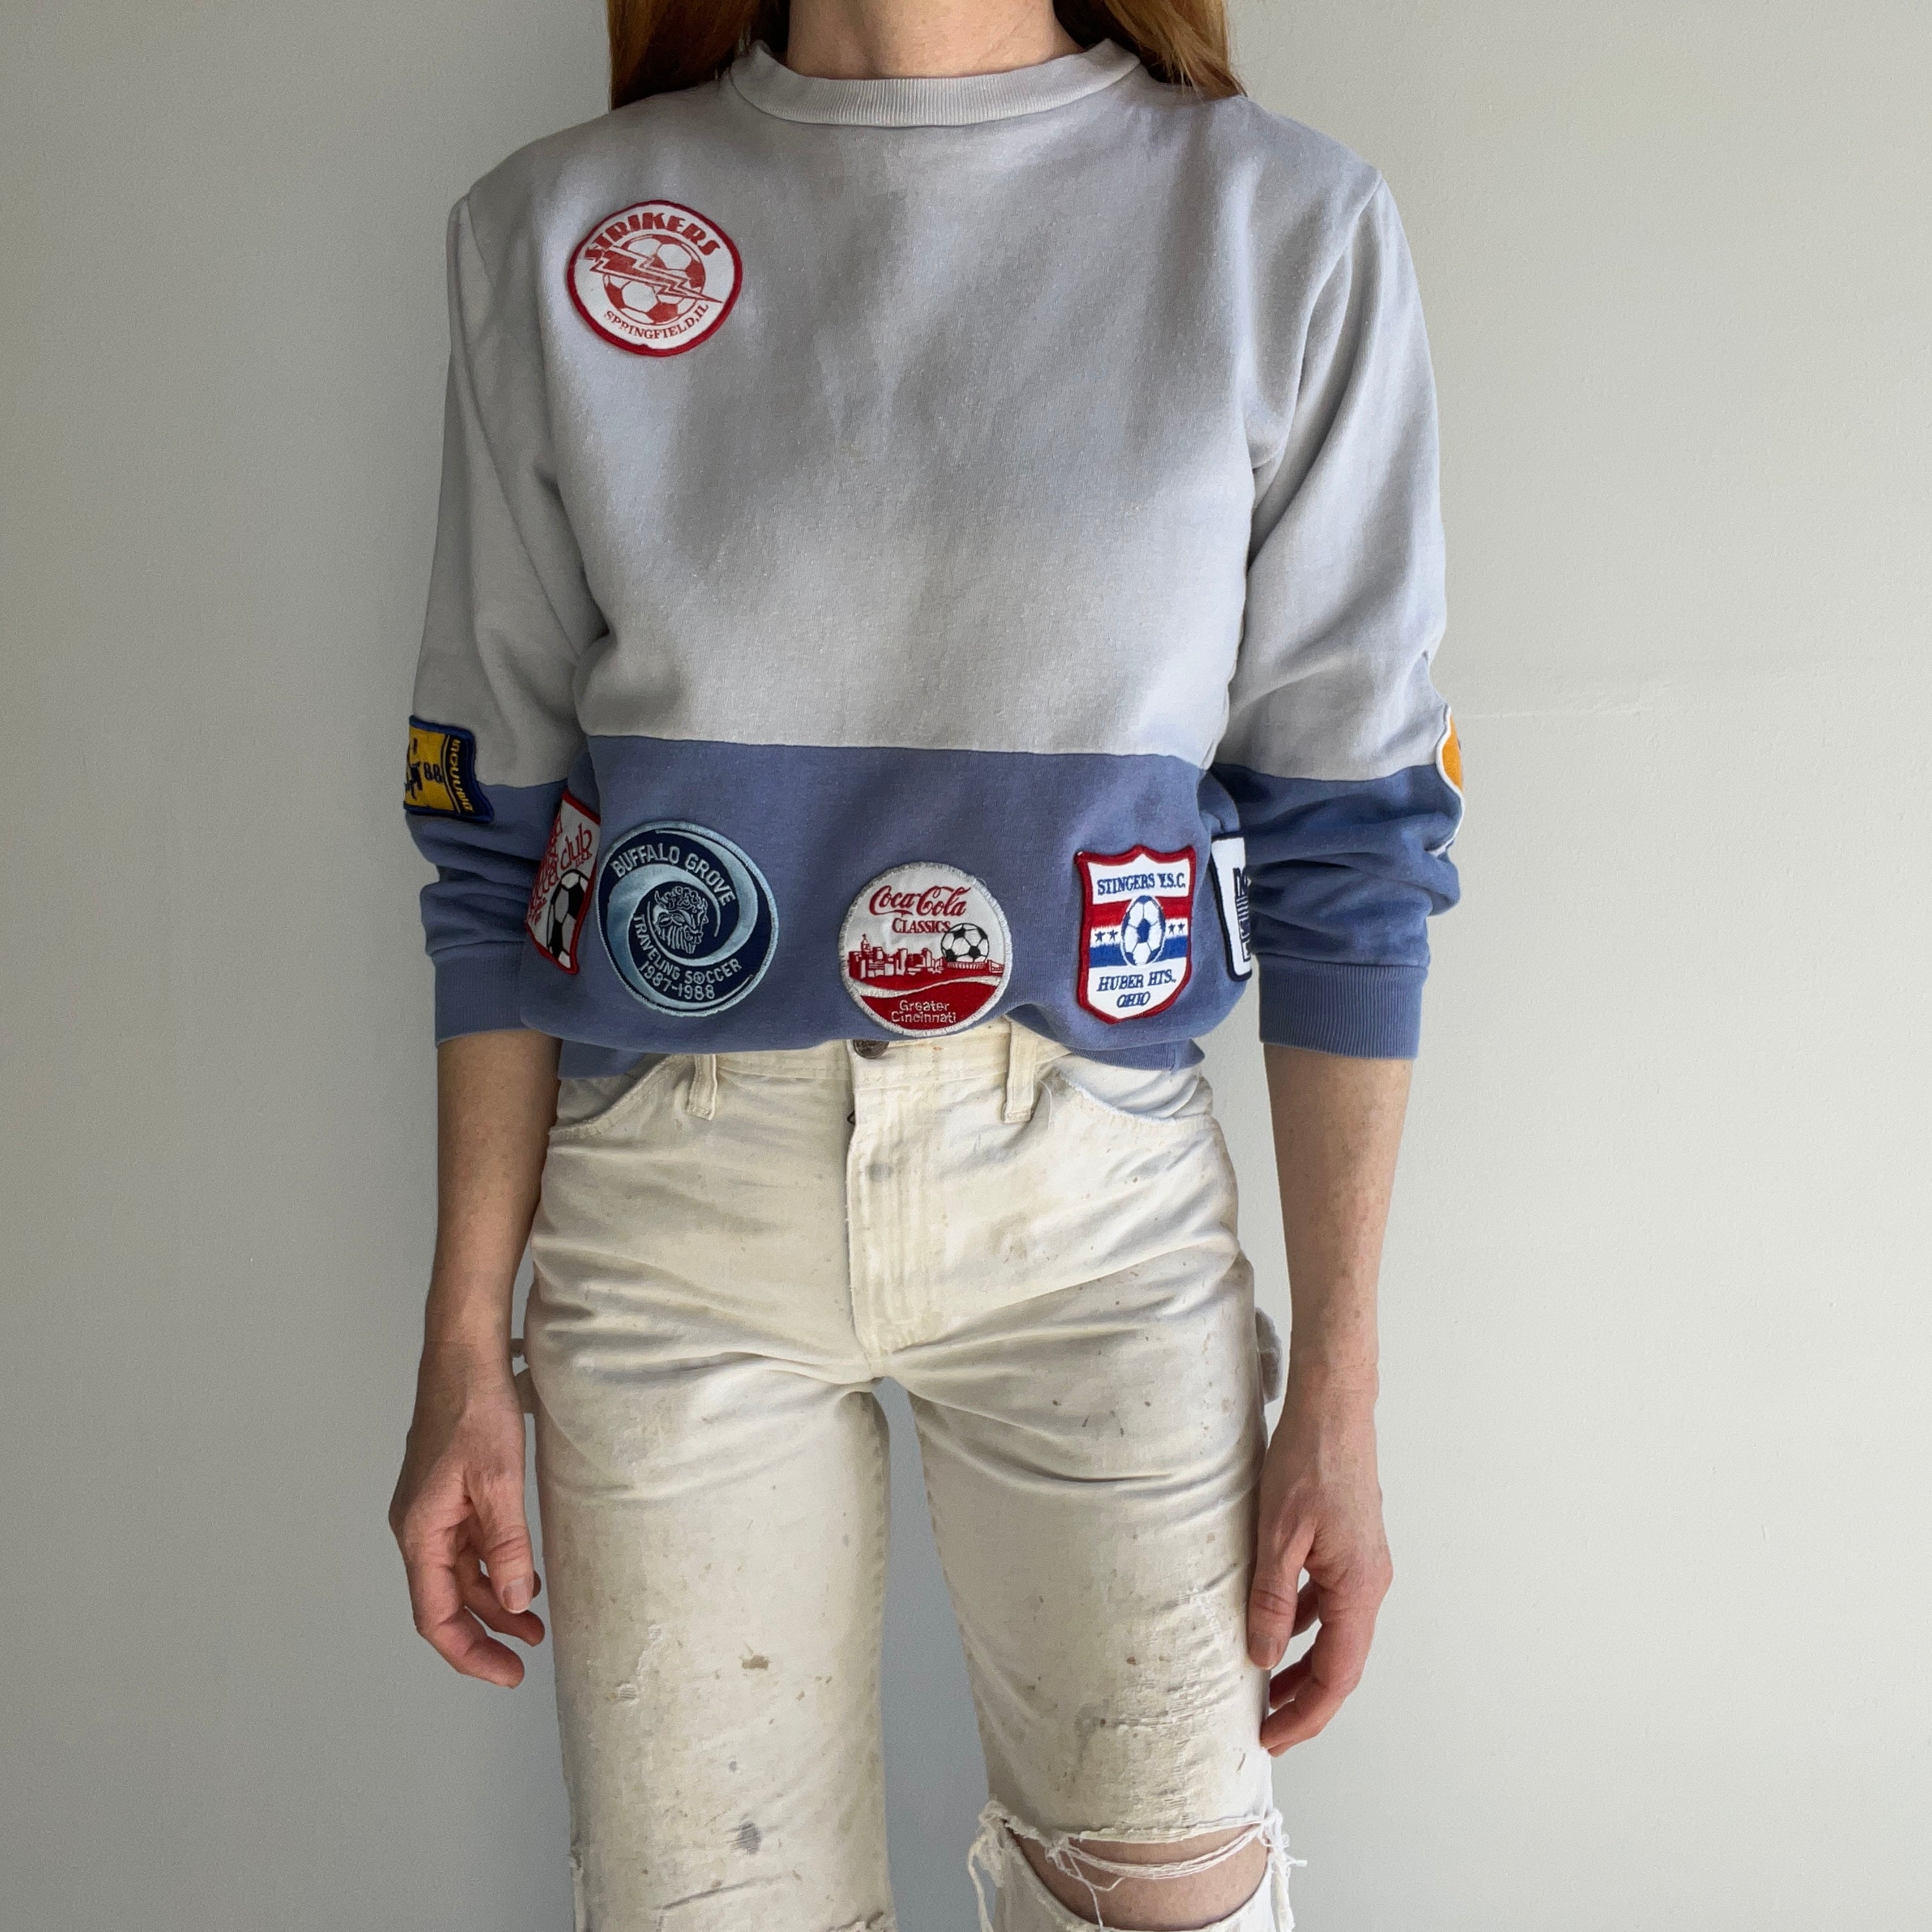 1988 (And Before) DIY Soccer and Other Patched Two Tone Color Block Mostly Cotton Sweatshirt